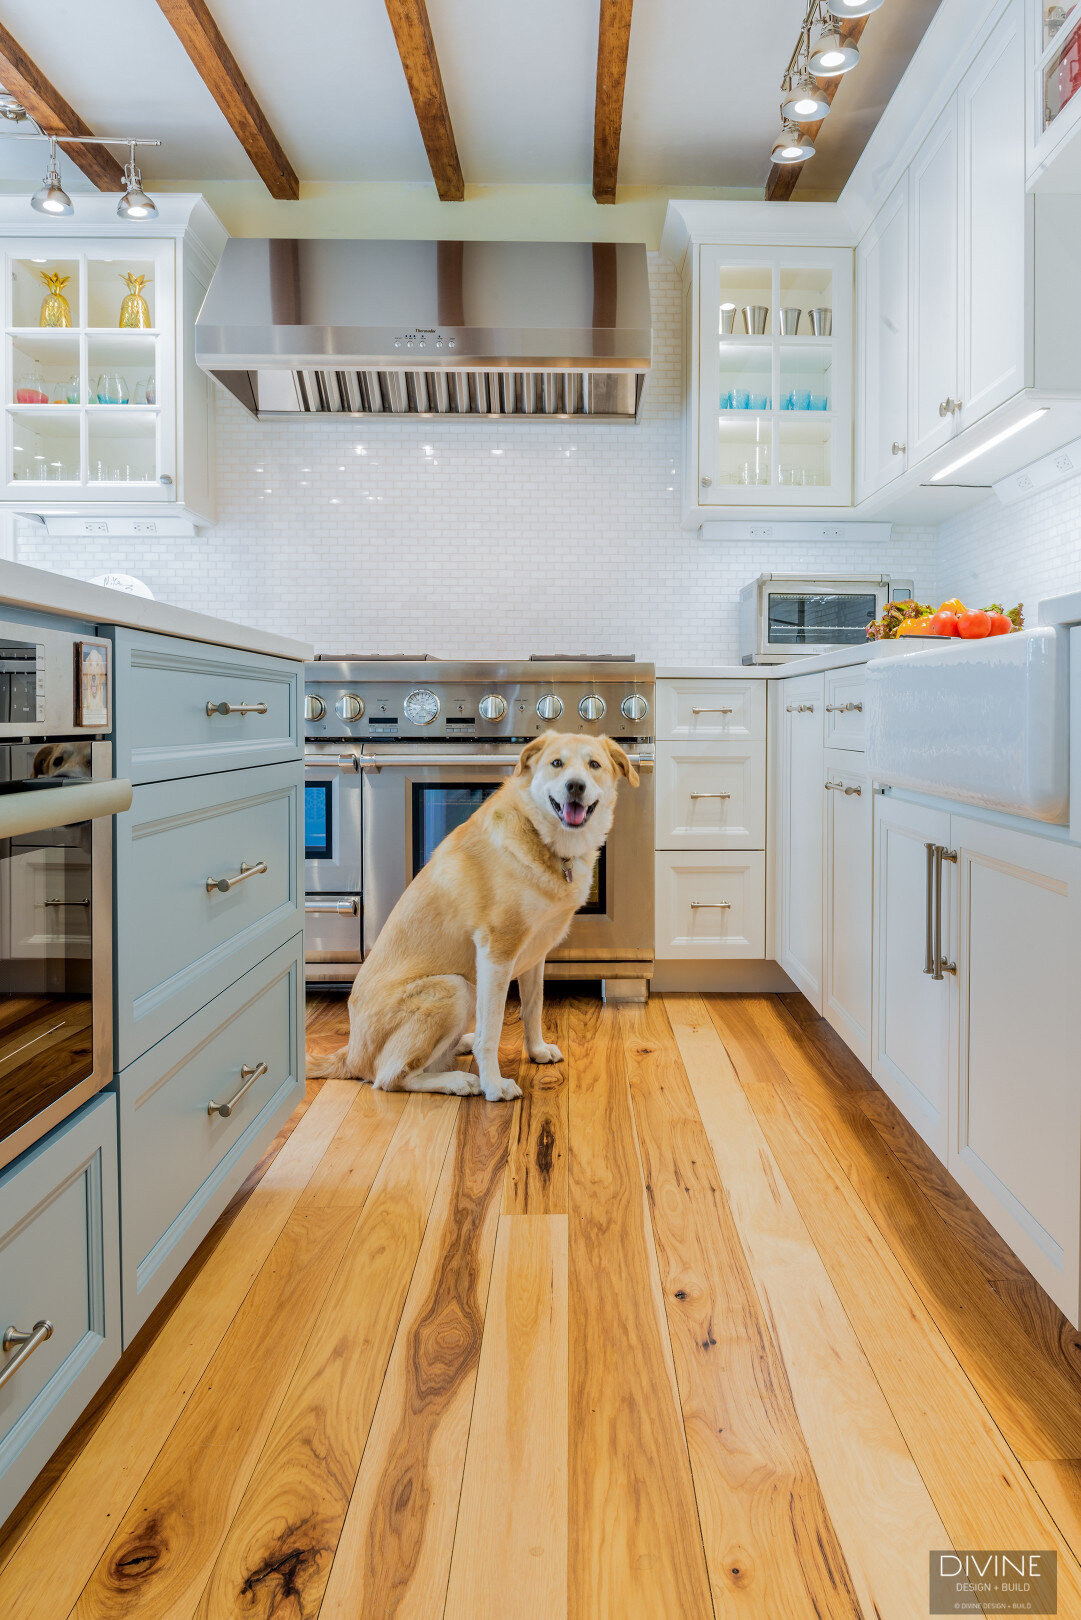 white, shaker style cabinets with brushed nickel accessories, white mosaic subway tile backsplash, cambria countertops with light marbling in grey tone and a labrador retriever